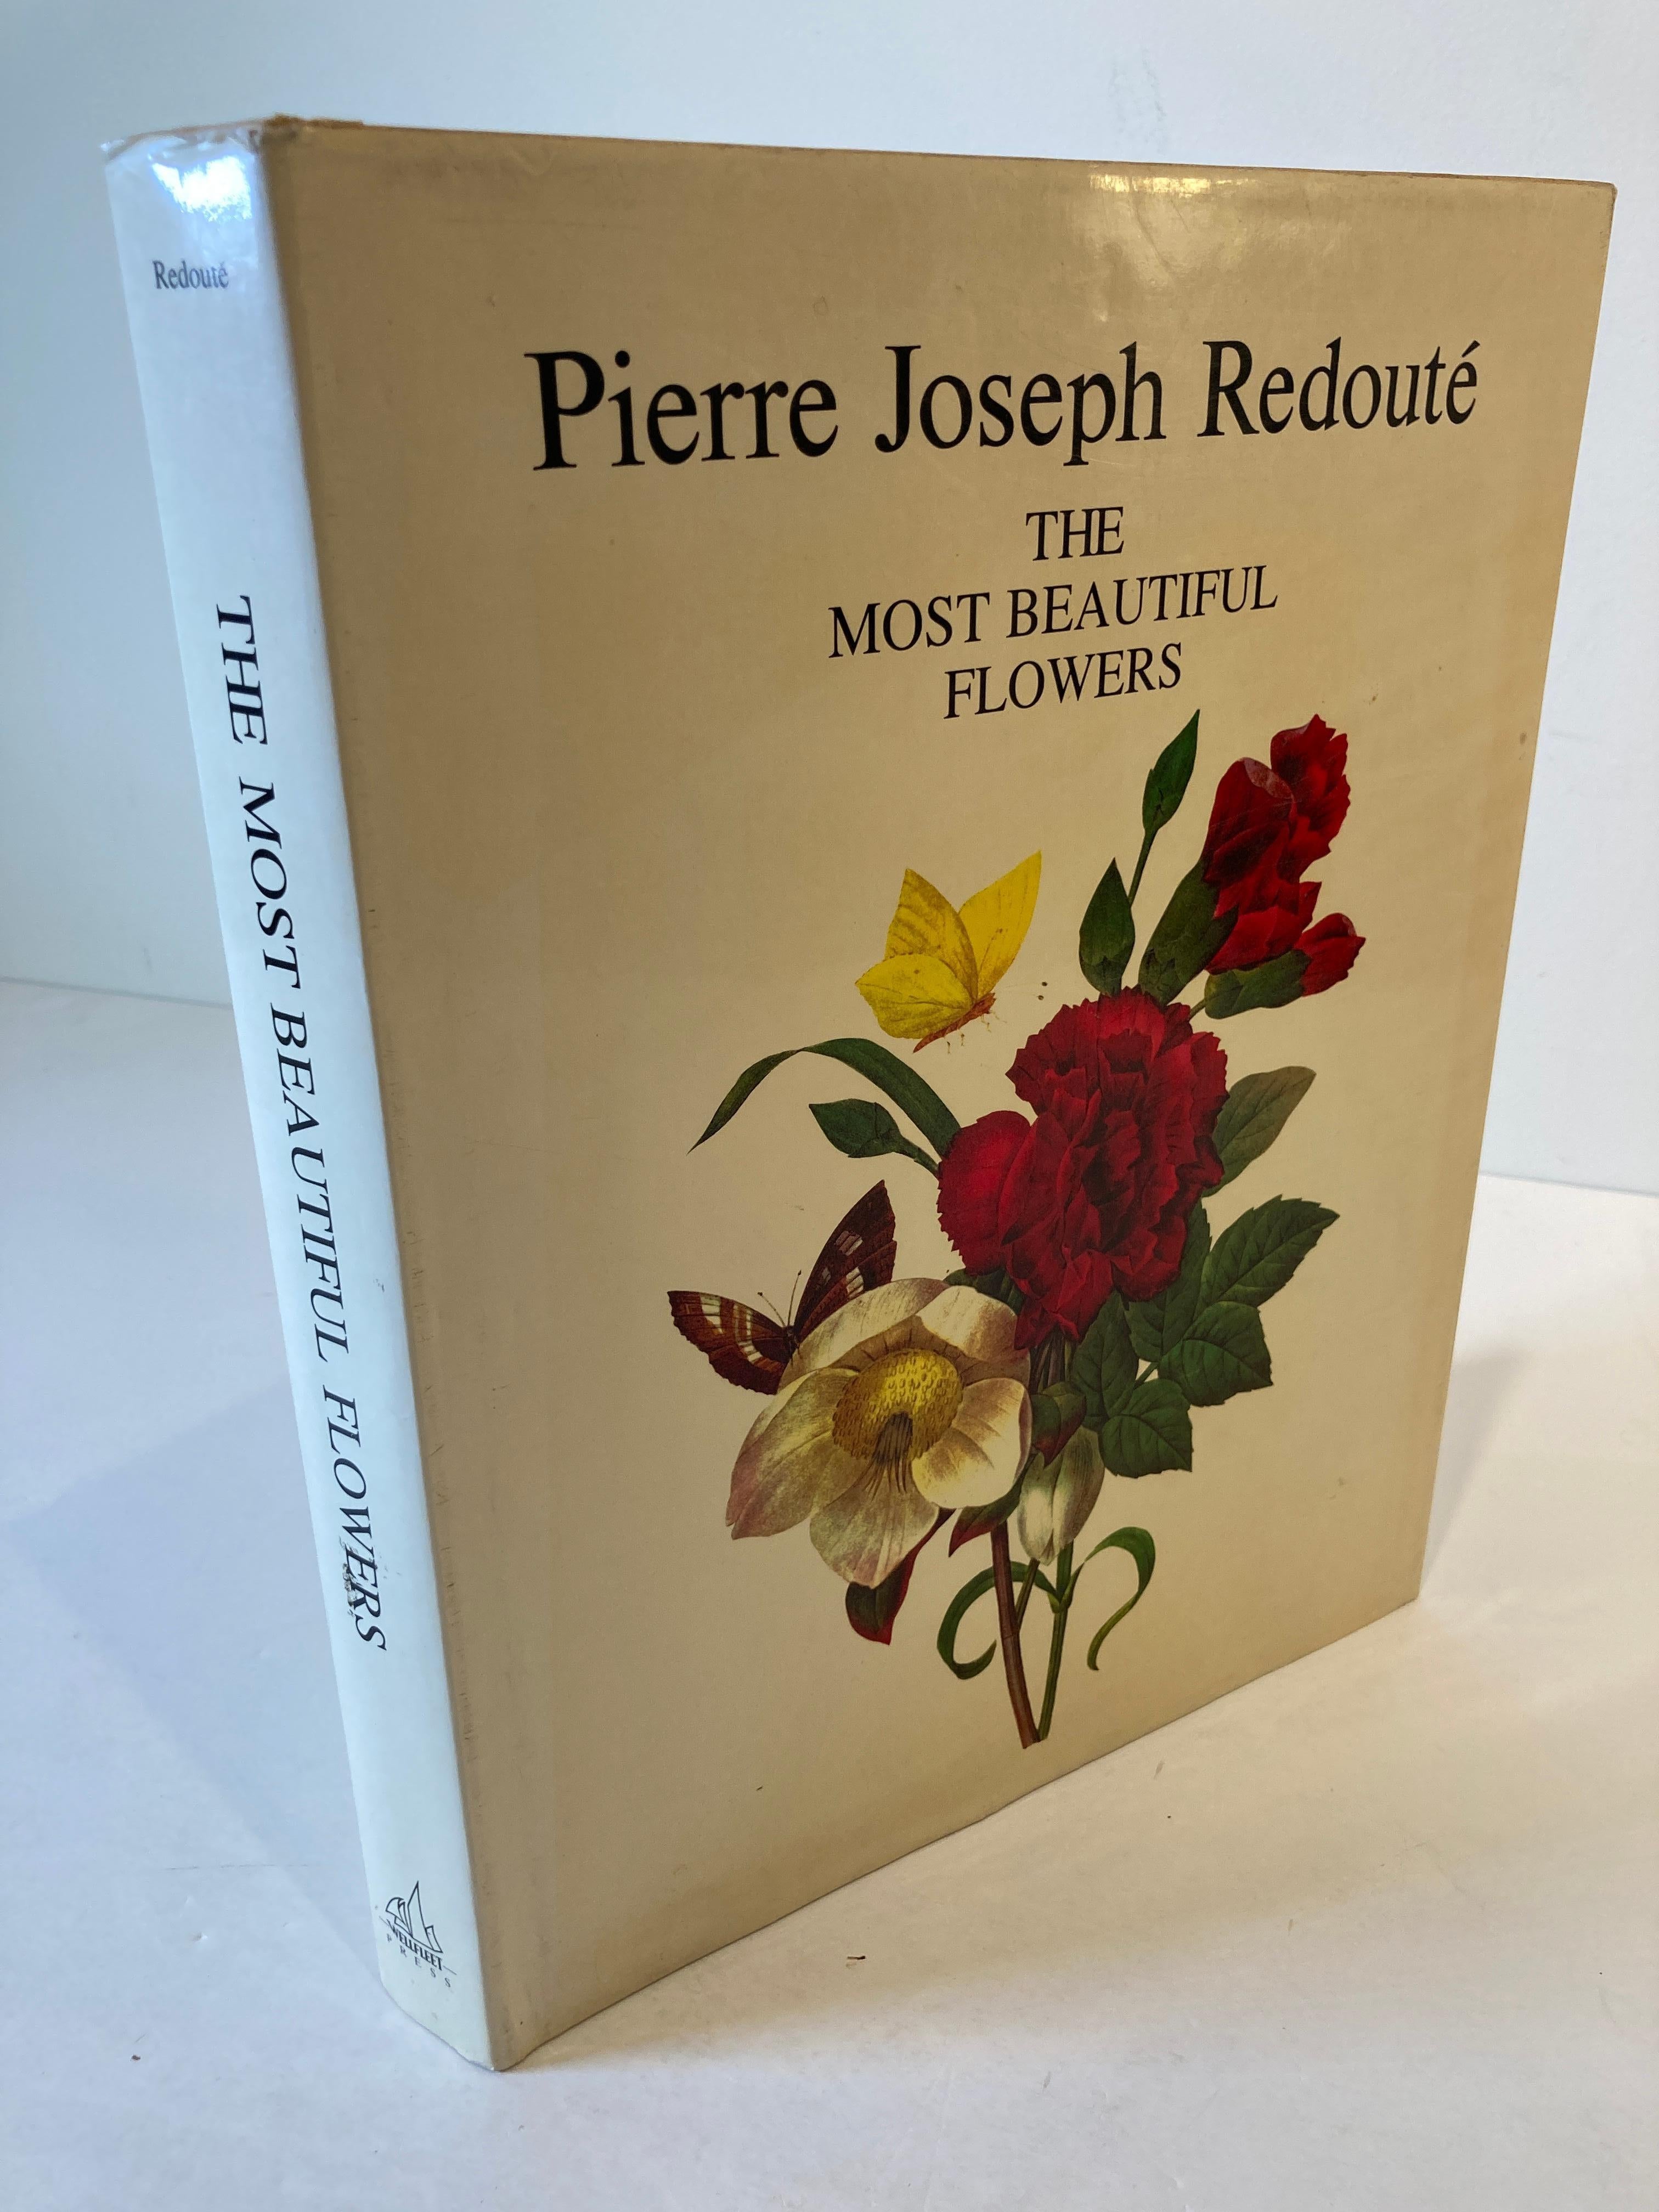 The Most Beautiful Flowers Book by Pierre-Joseph Redouté.
Large heavy book.
Rare indeed is the artist who is feted by royalty, and at the same time sought after by naturalists and scientists as an active collaborator. Such a painter was Pierre